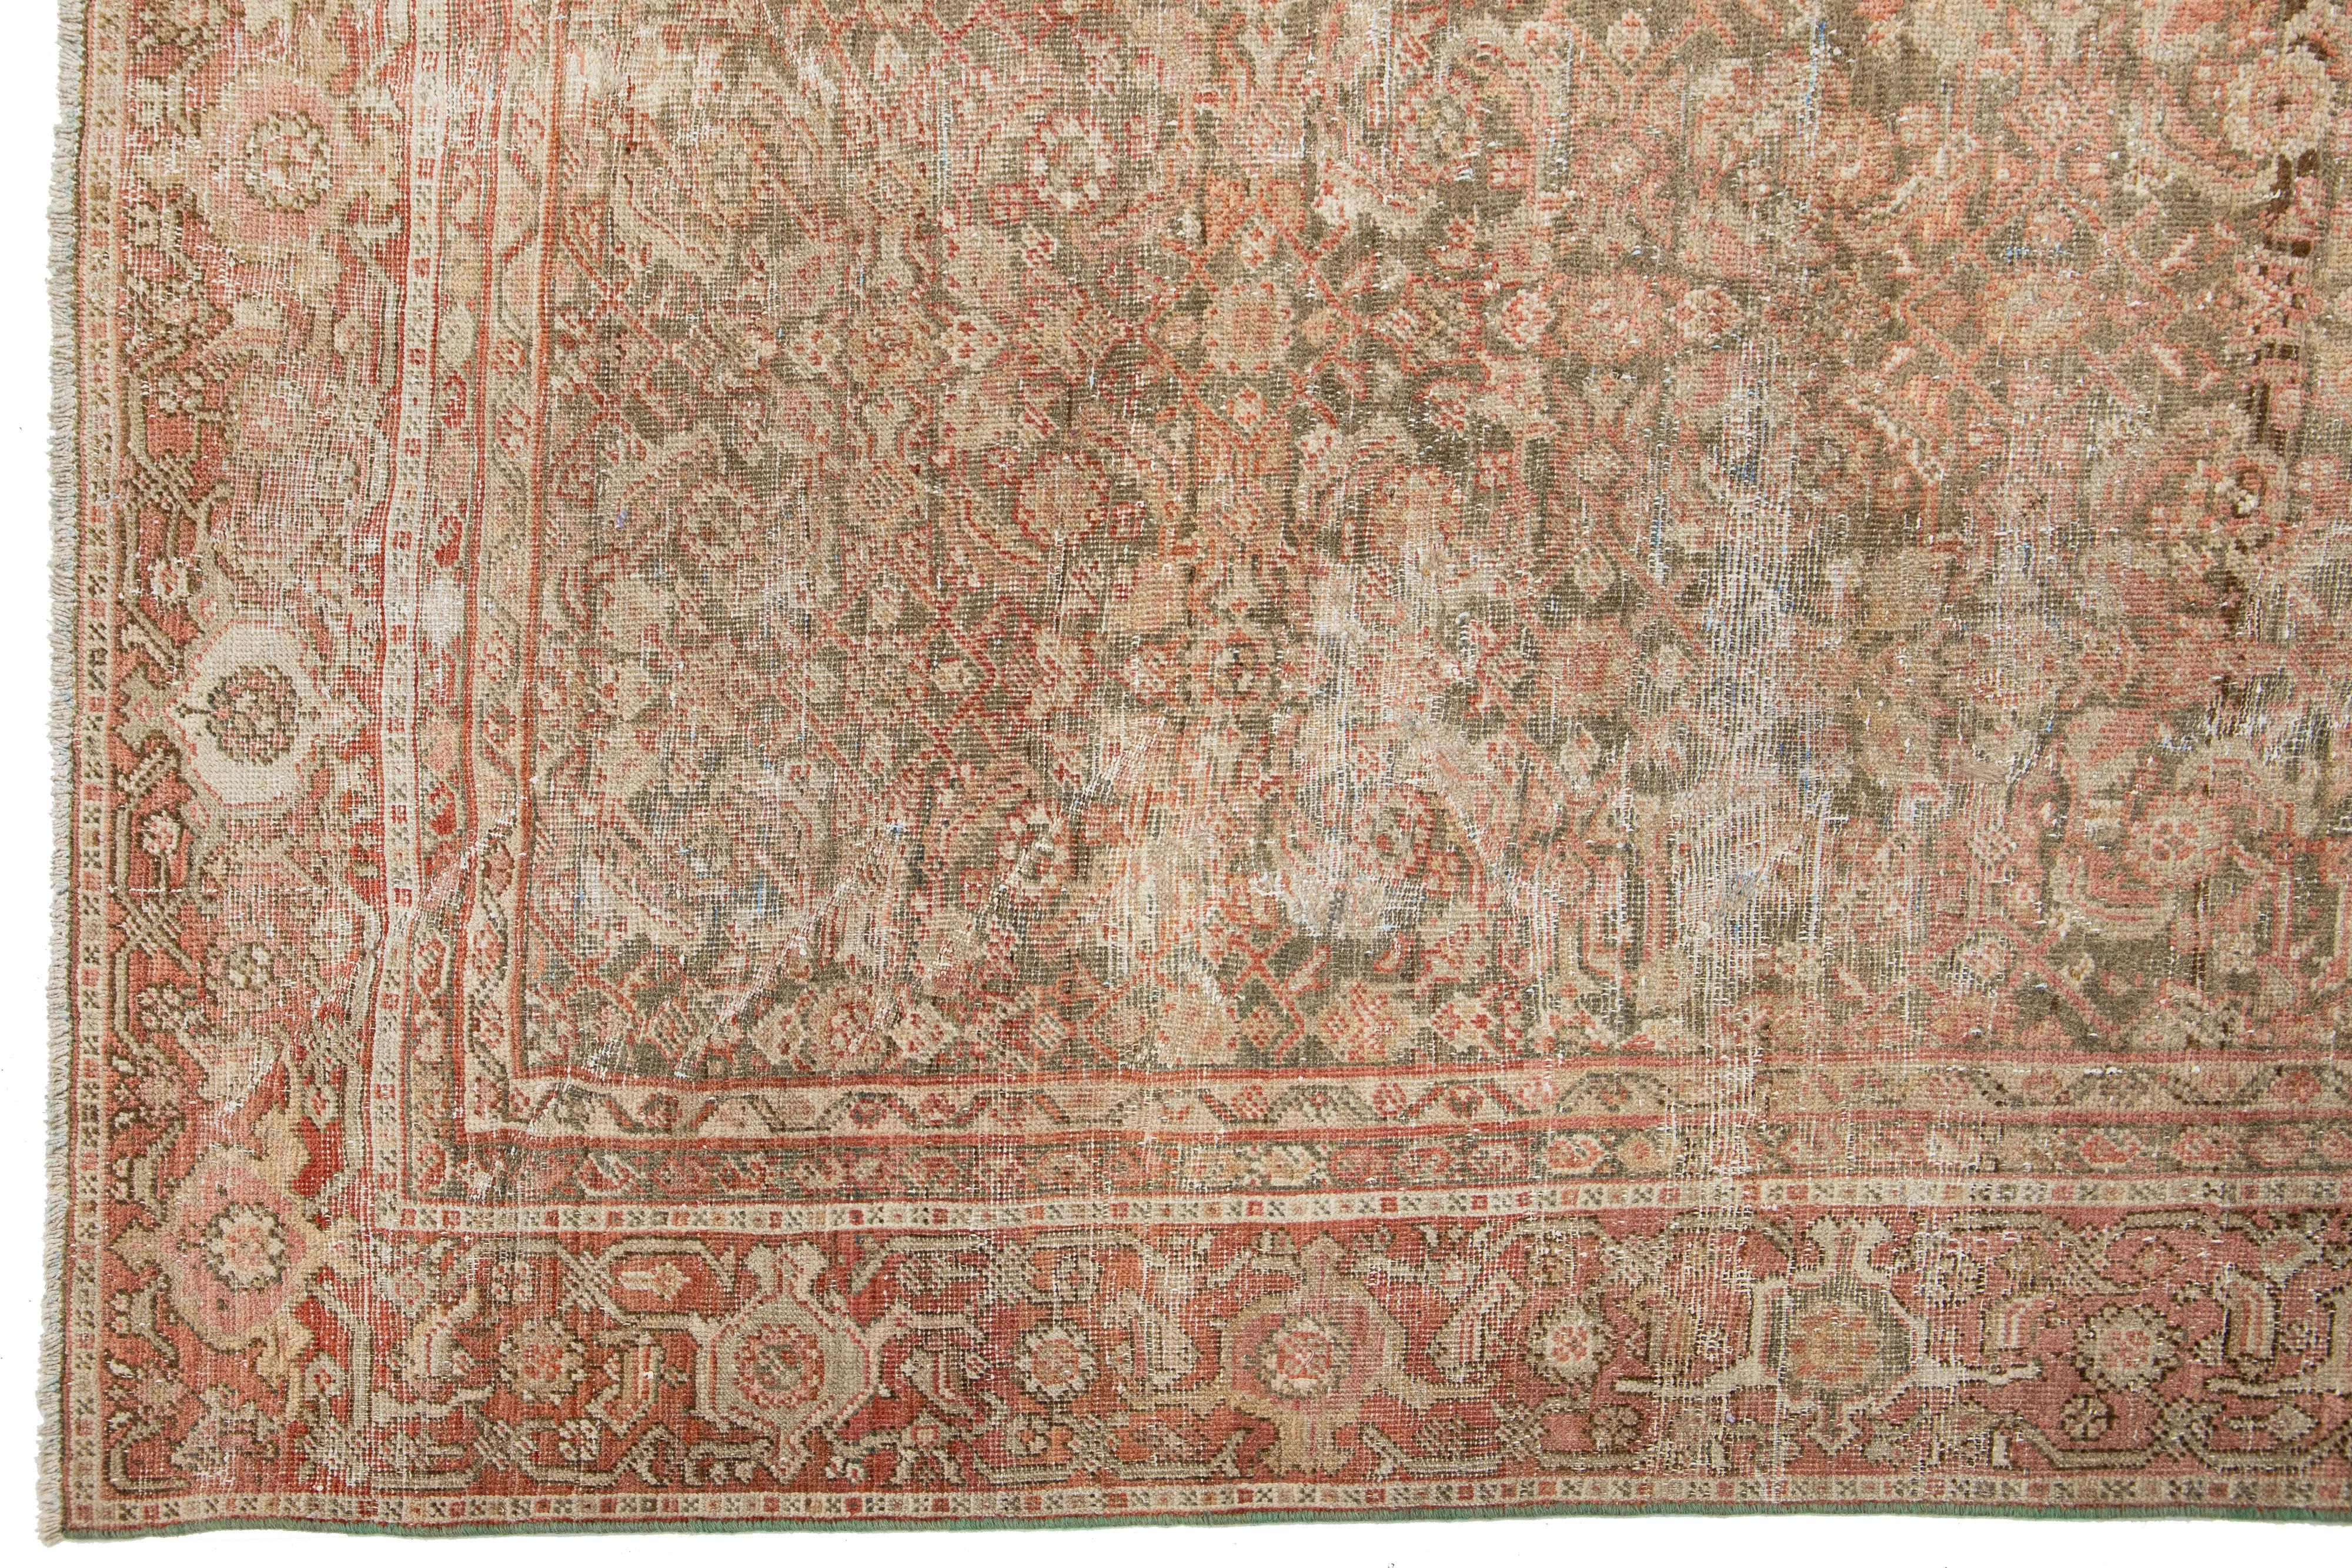 20th Century Antique Persian Tabriz Wool Rug with Rust Allover Design from the 1910s For Sale